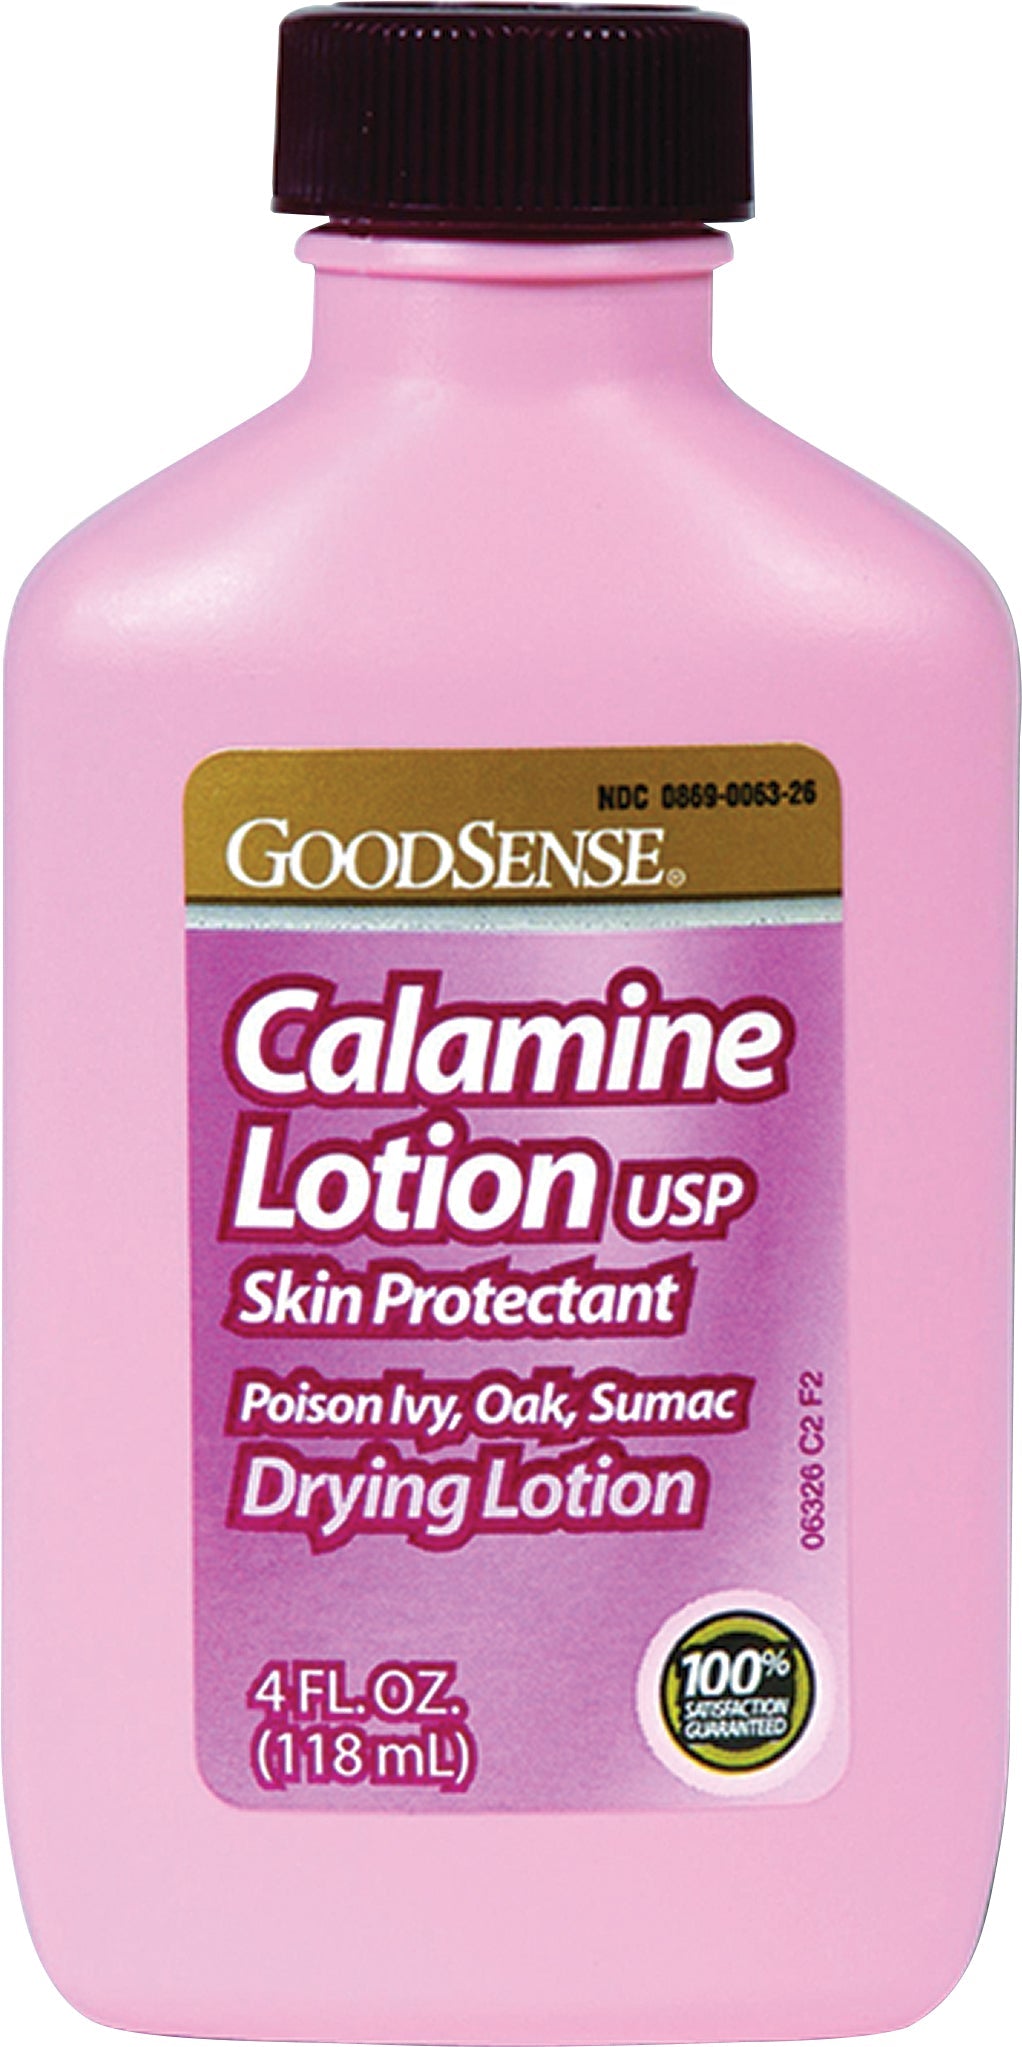 EA/1 - Medicated Calamine Lotion, 6 oz. - Best Buy Medical Supplies